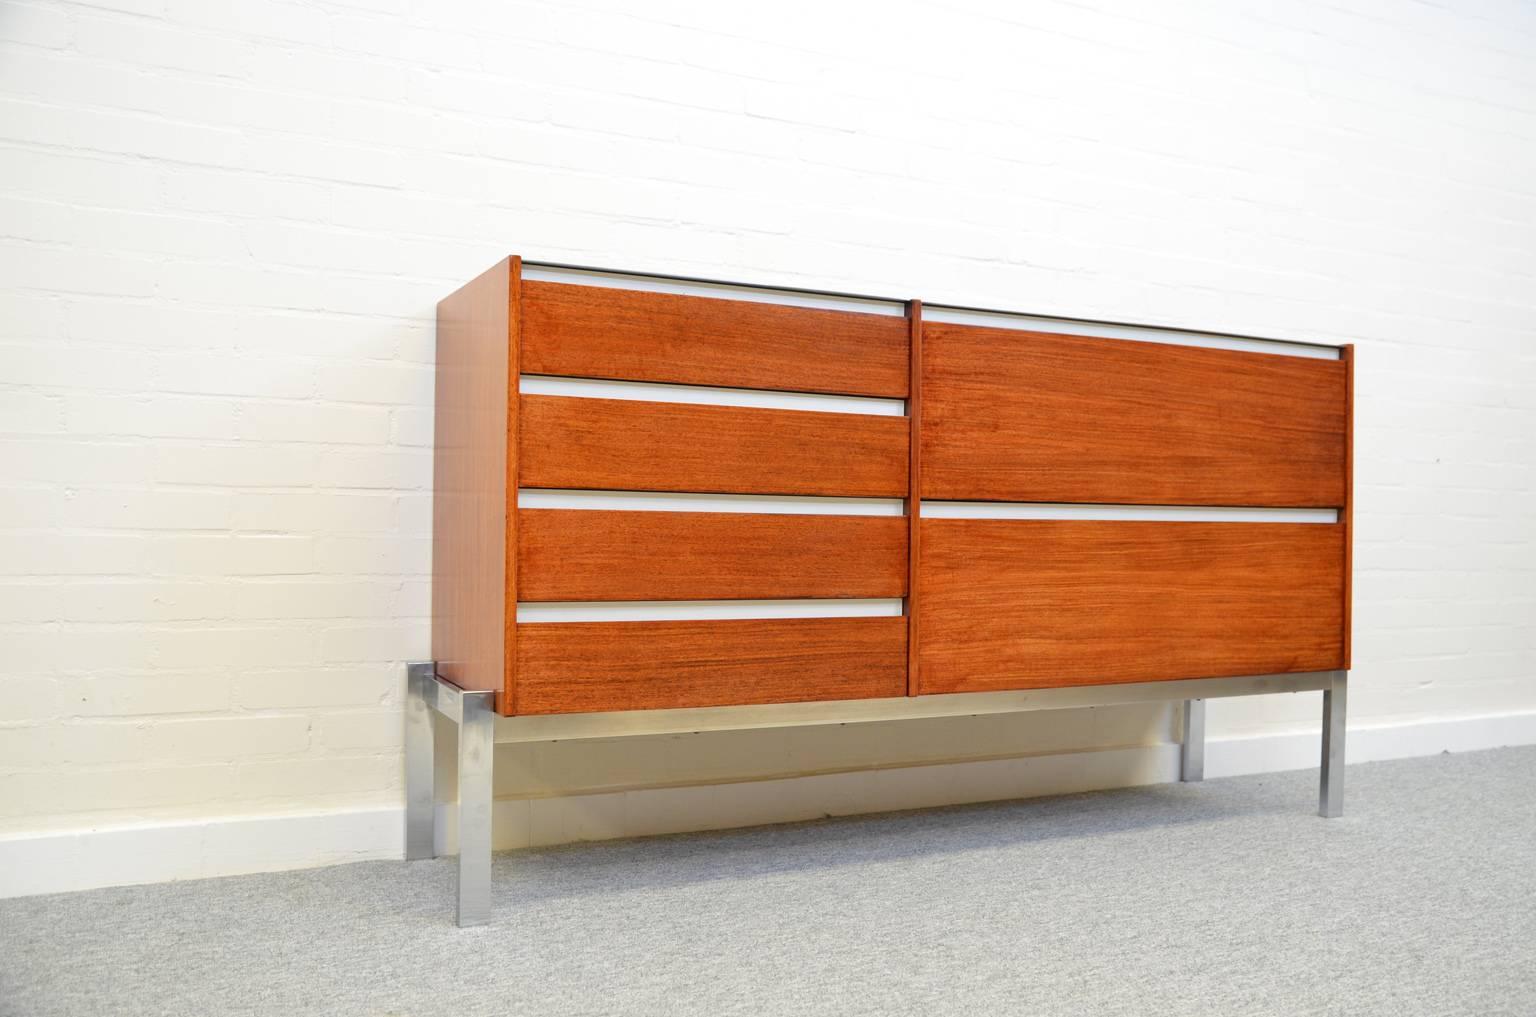 A rosewood sideboard by Kho Liang Ie & Wim Crouwel for Fristho standing on a chrome-plated metal base. This sideboard is in a good and original condition, with minor wear consistent with age and use.